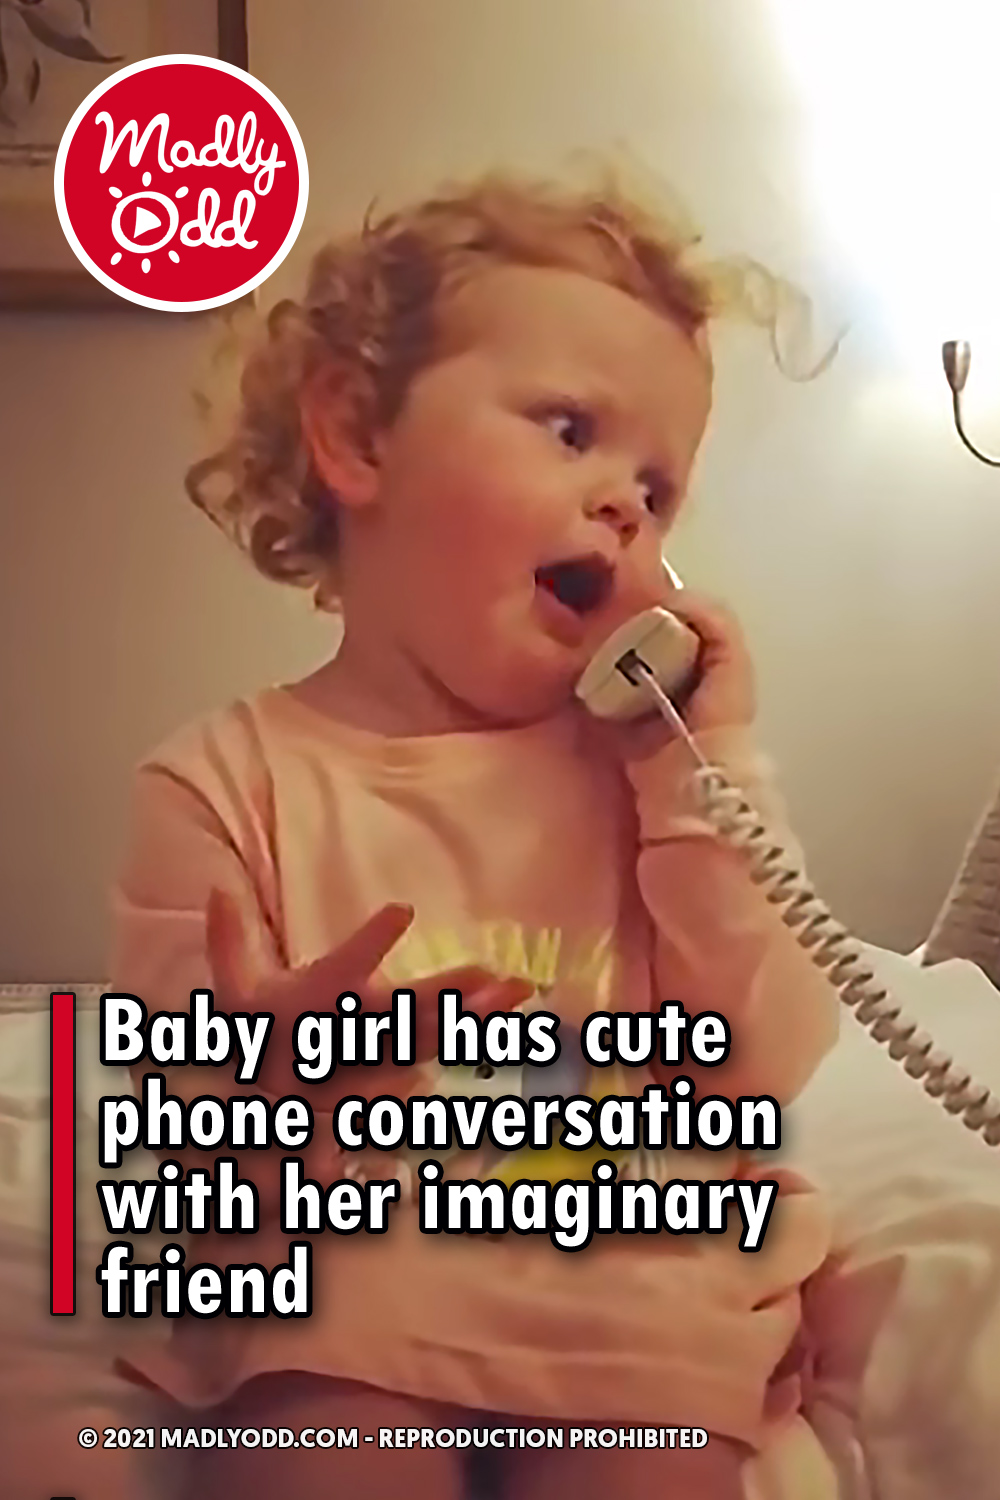 Baby girl has cute phone conversation with her imaginary friend